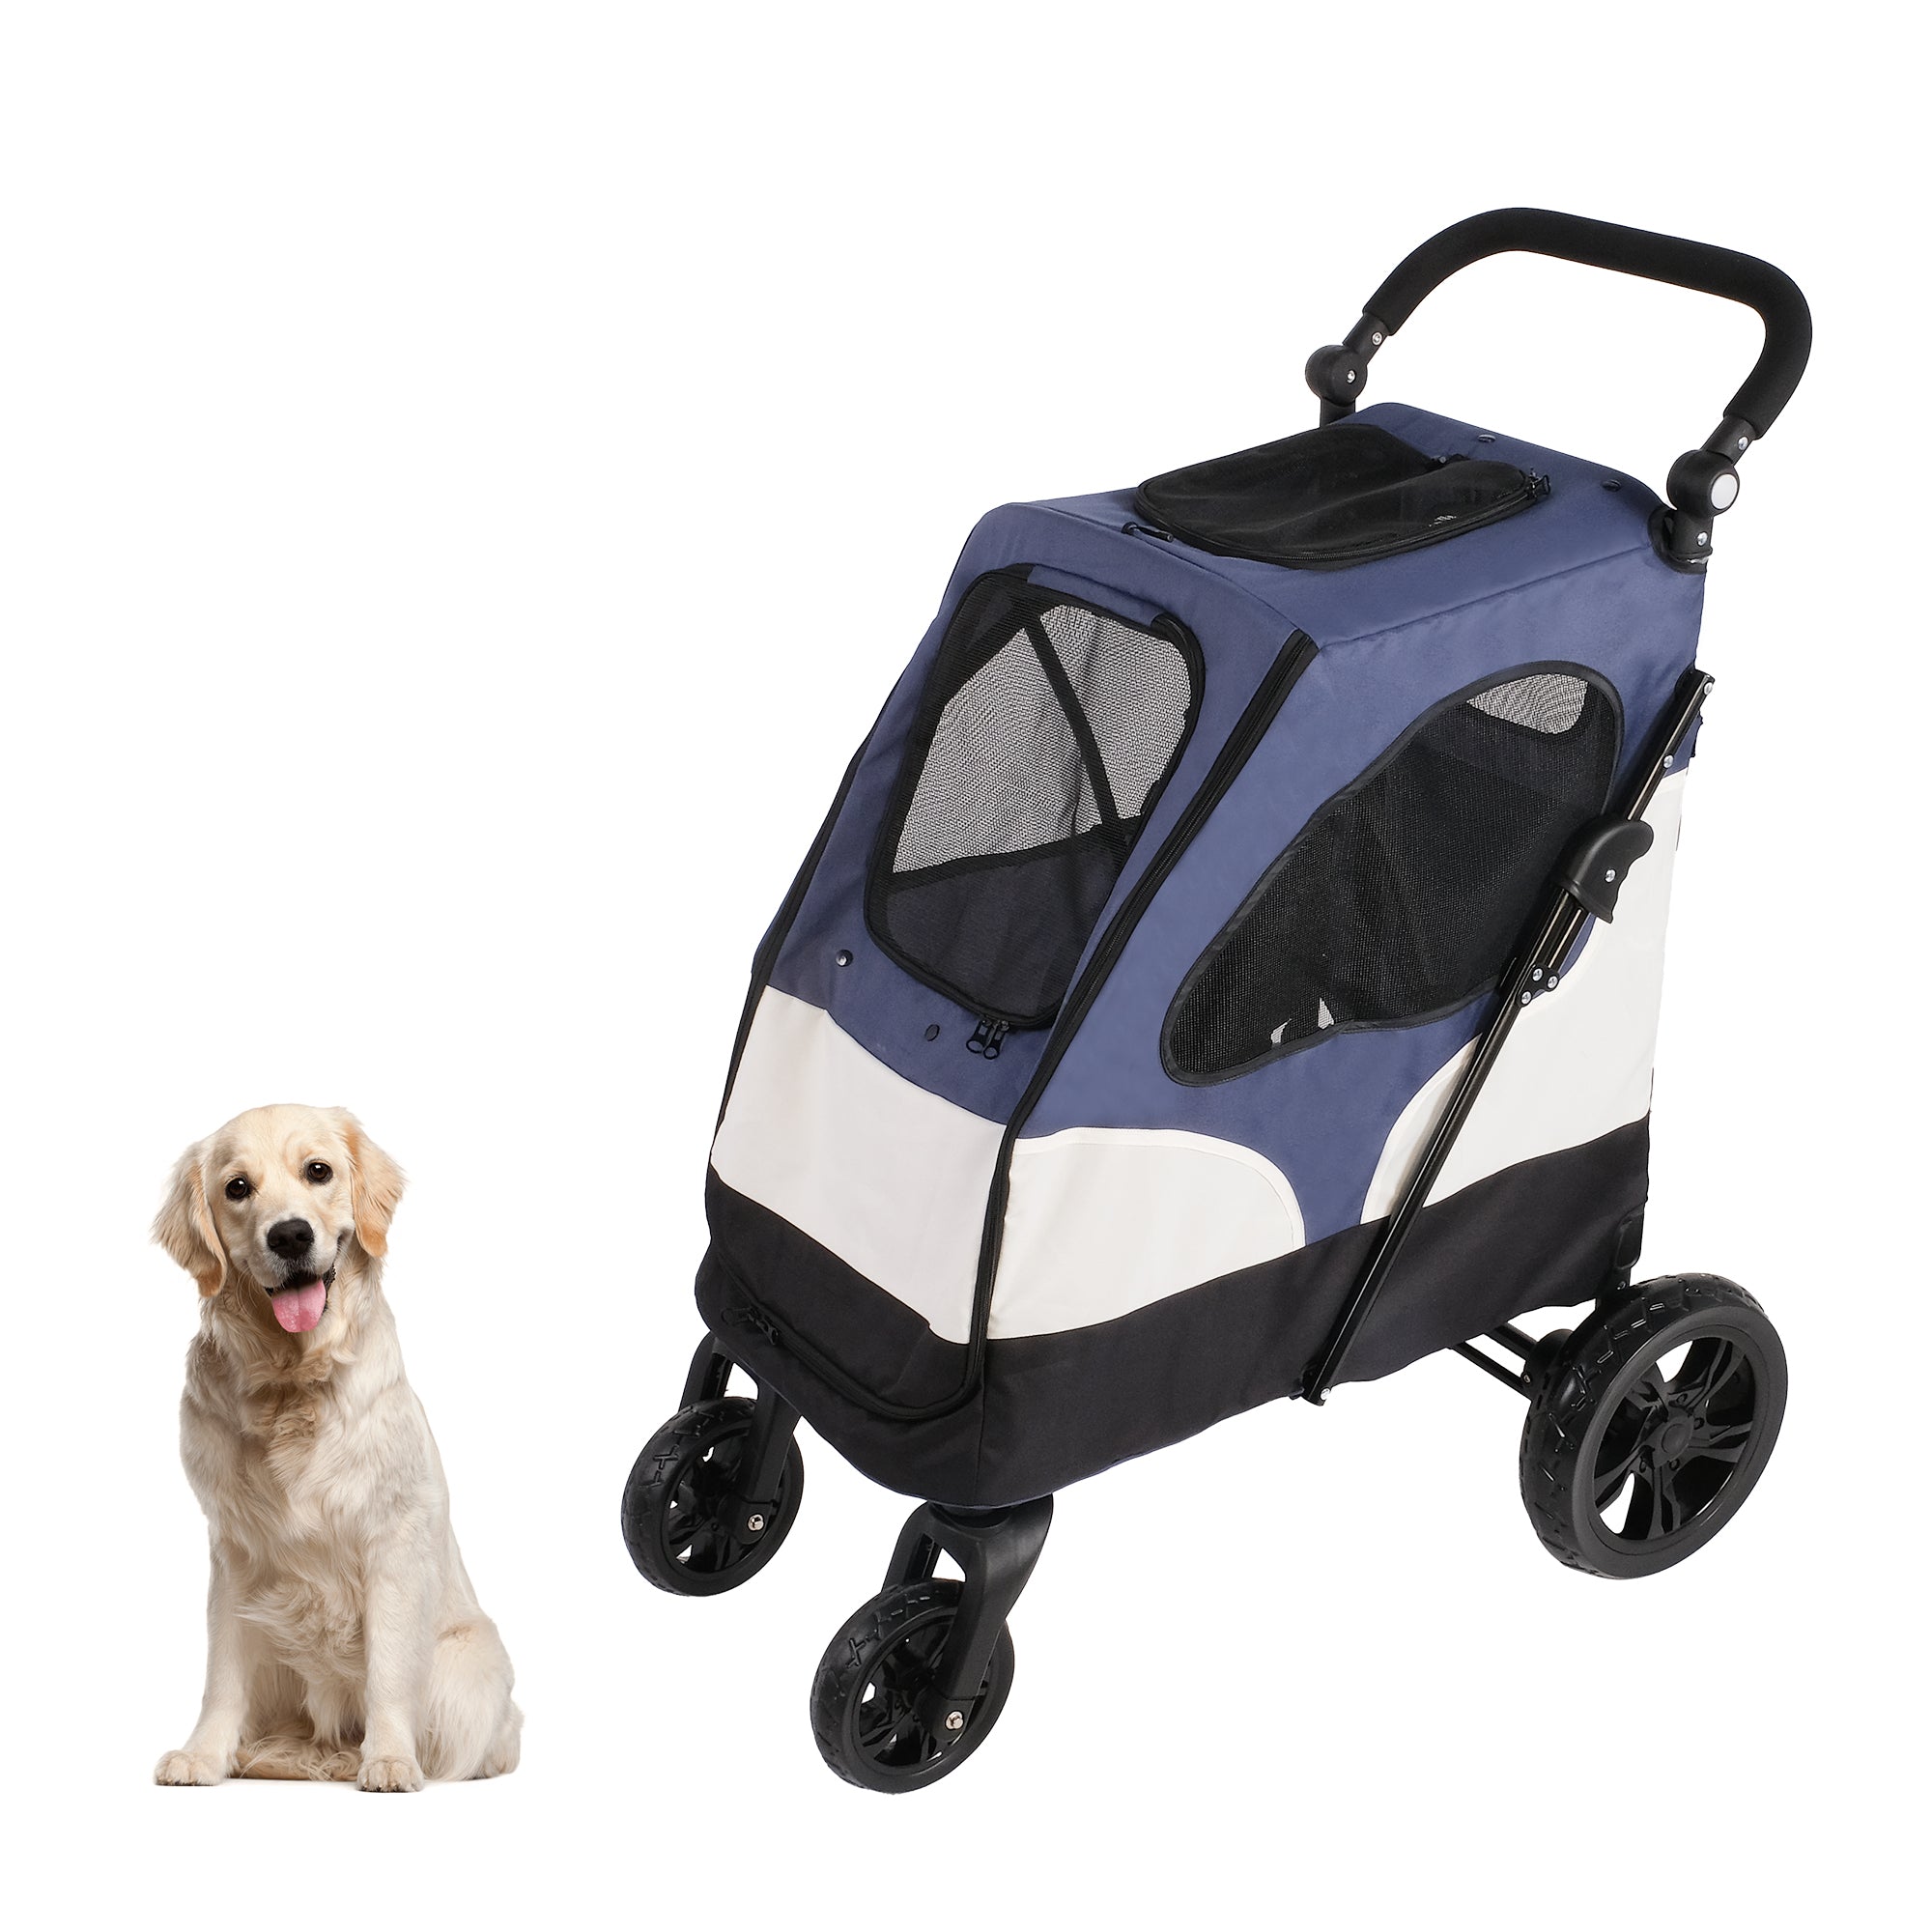 LUCKYERMORE Foldable Travel Dog Stroller Pet carrier with Adjustable Handle & Mesh Window, Blue